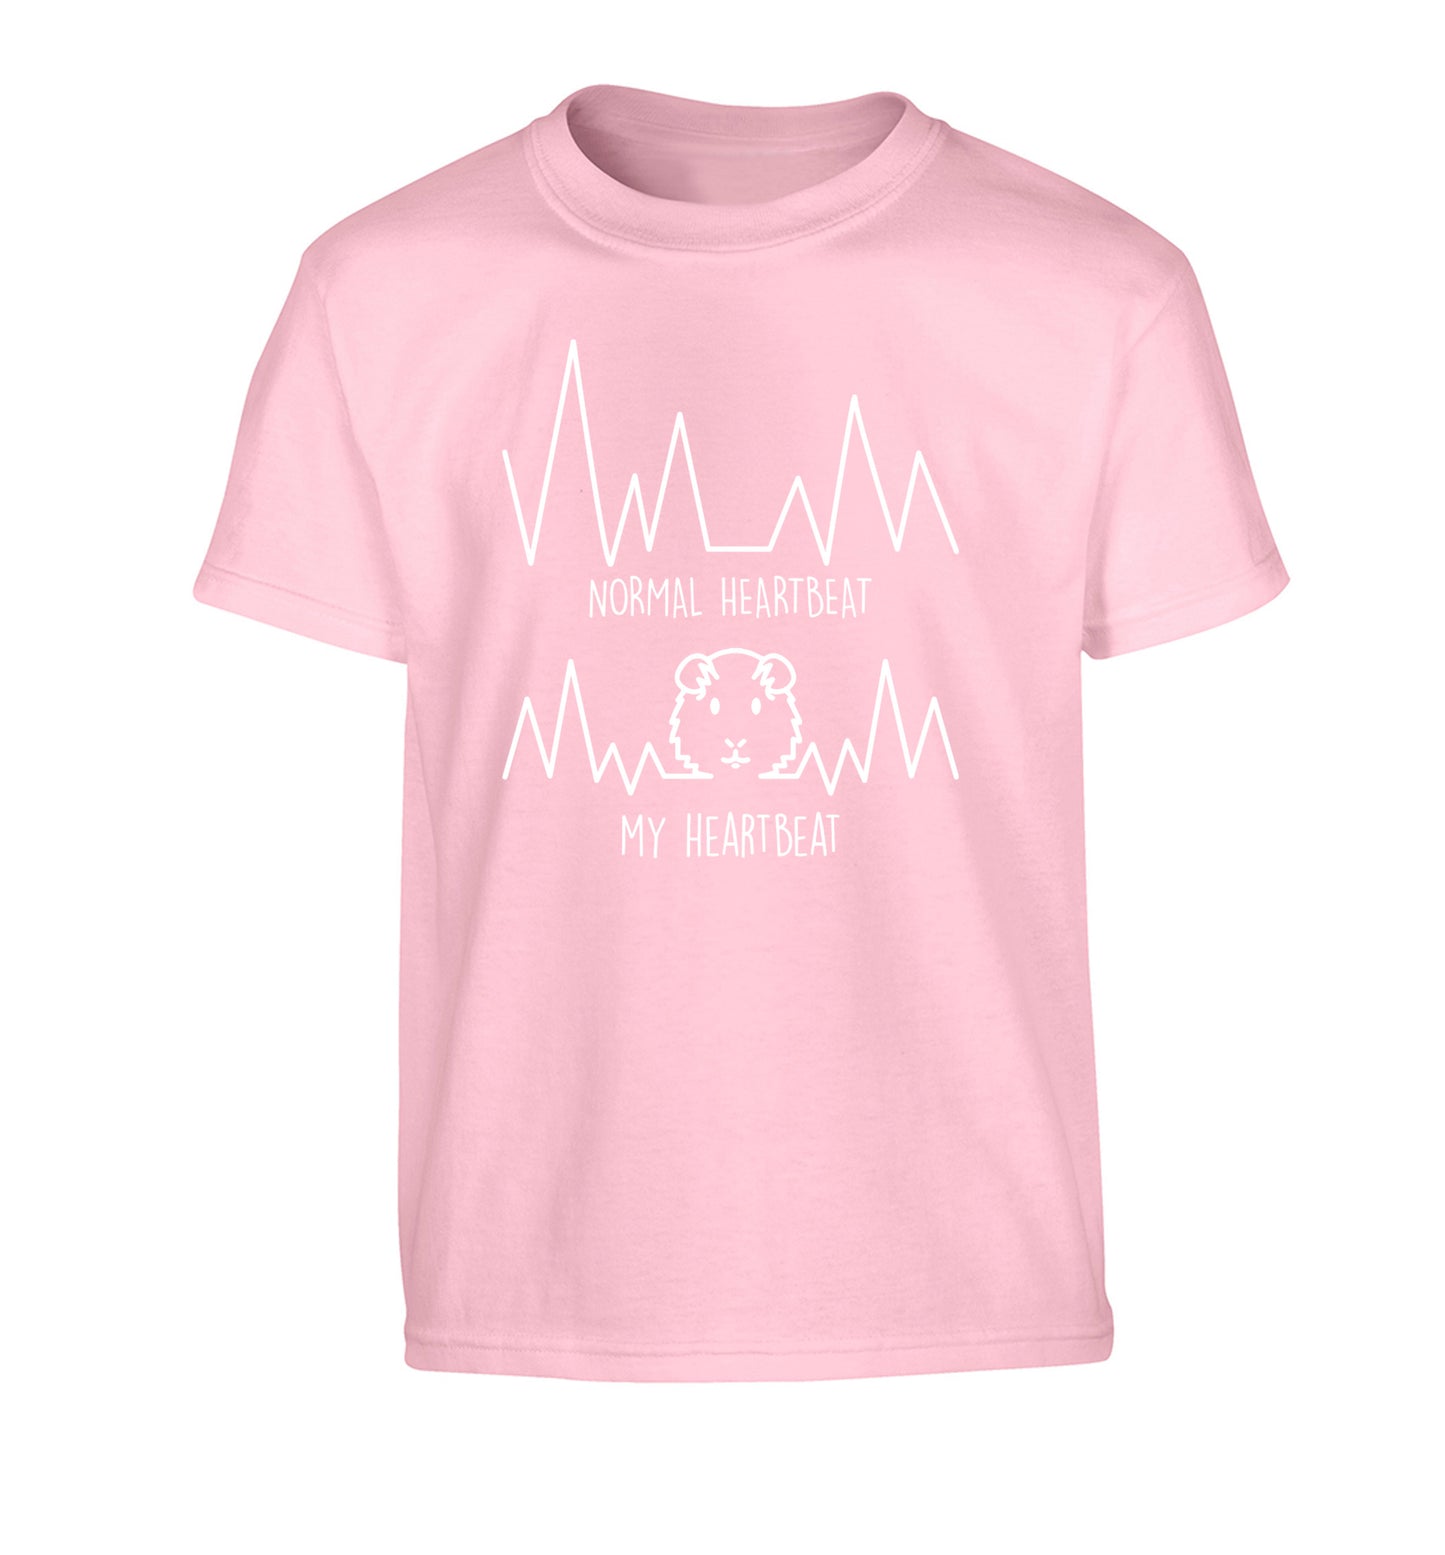 Normal heartbeat vs my heartbeat guinea pig lover Children's light pink Tshirt 12-14 Years